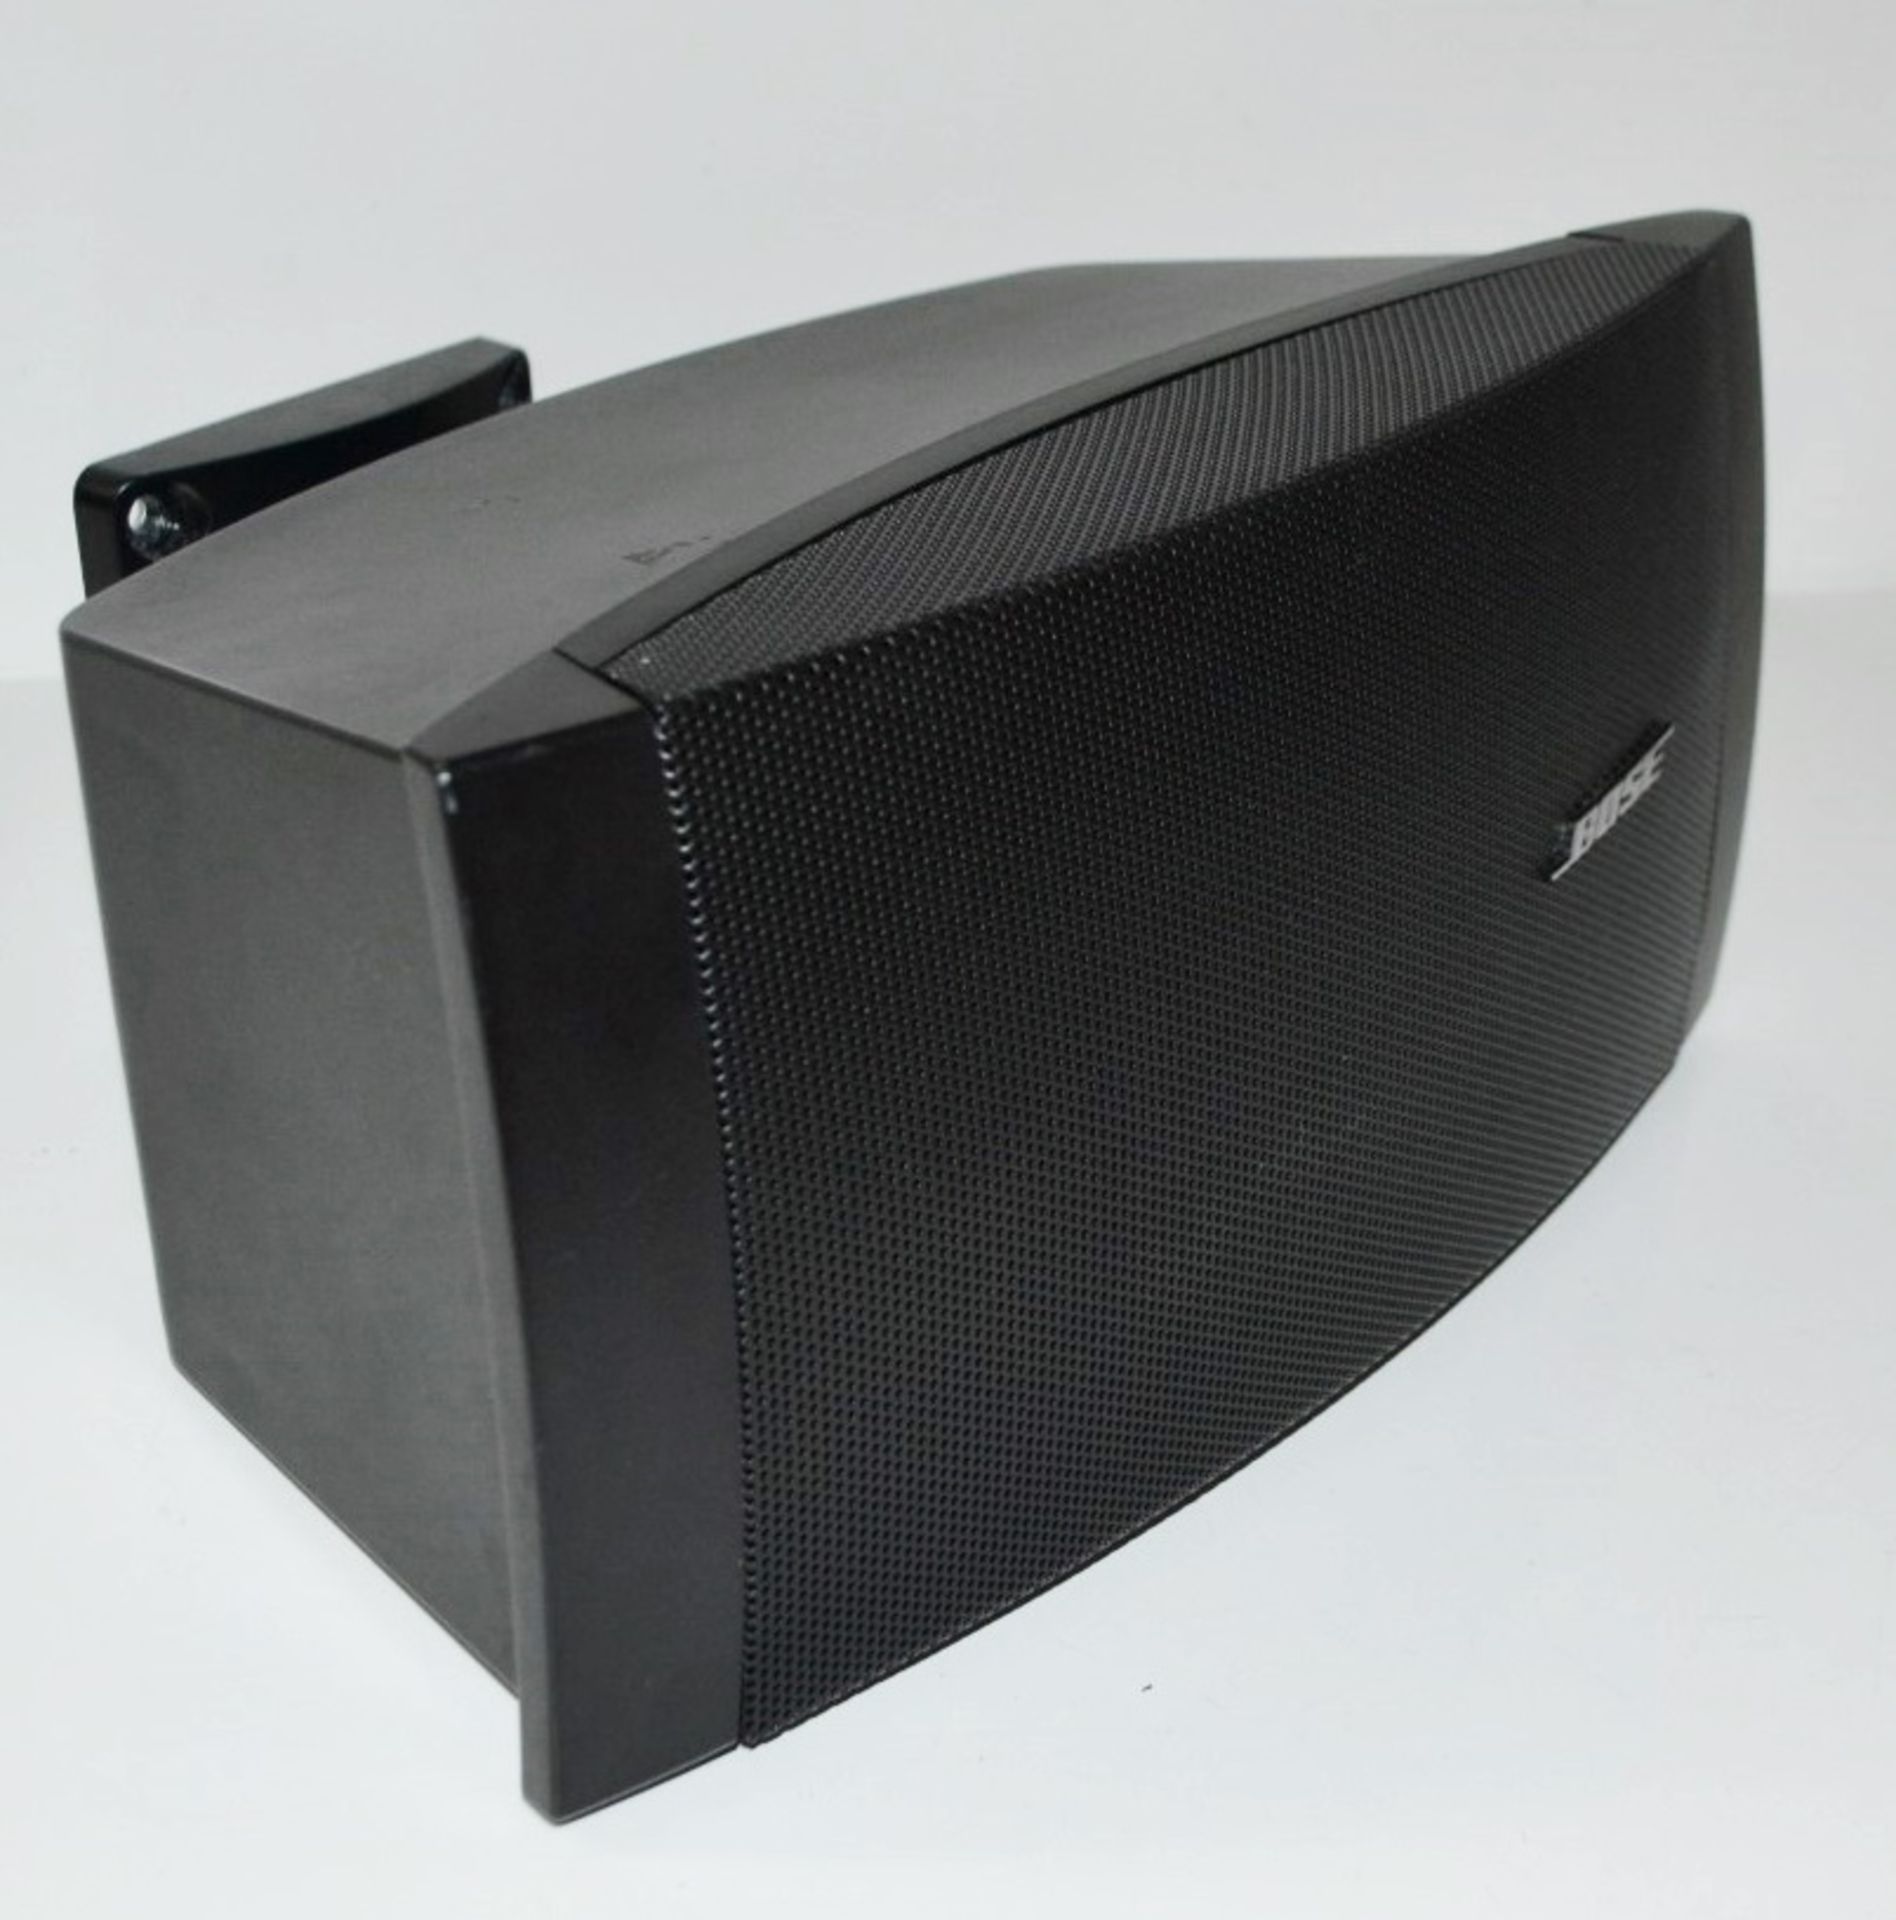 4 x Bose FreeSpace DS 40SE Loudspeakers - Dimensions: 15.9 x 32.6 x 17.5 cm - Recently Removed - Image 4 of 5